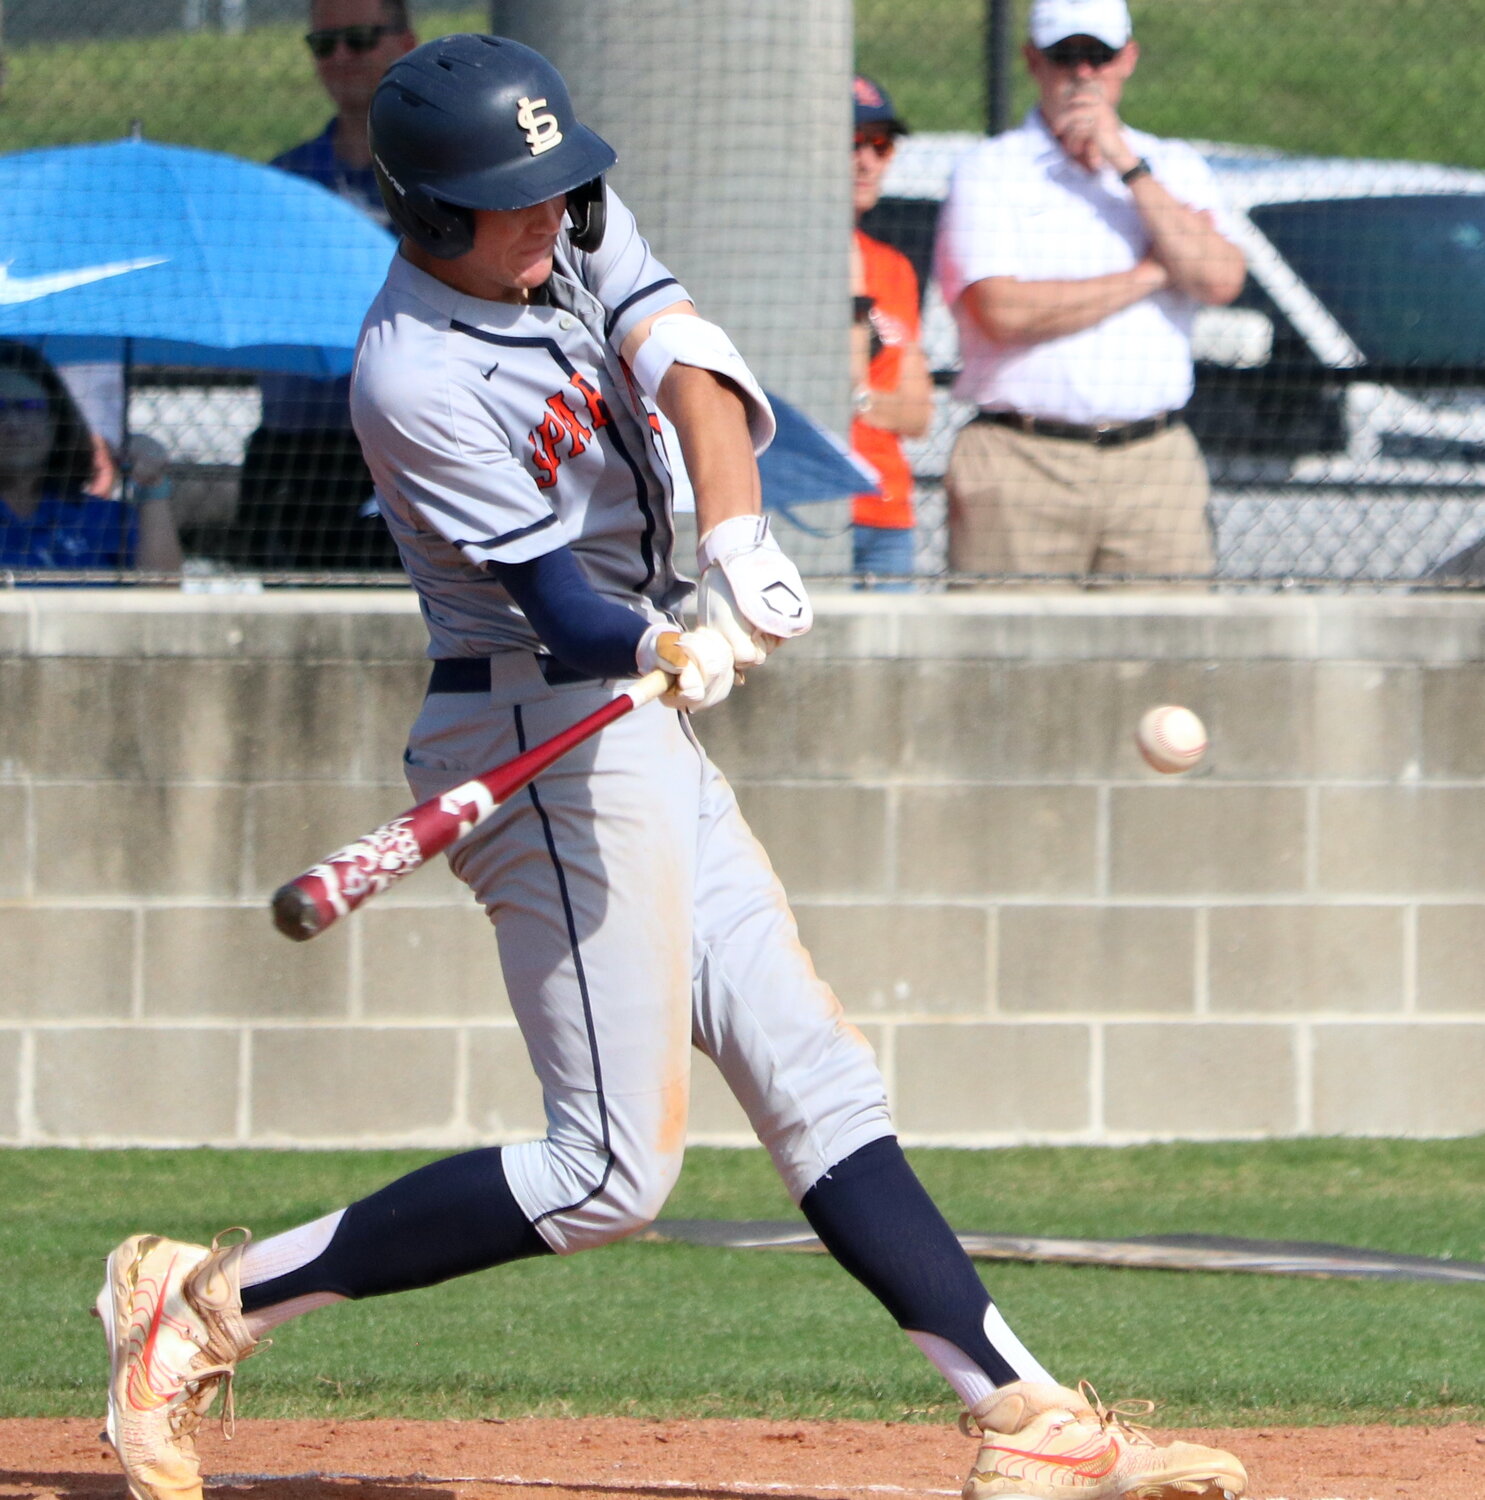 Nate Johnson hits during Monday's District 19-6A play-in game between Seven Lakes and Taylor at the Mayde Creek baseball field.